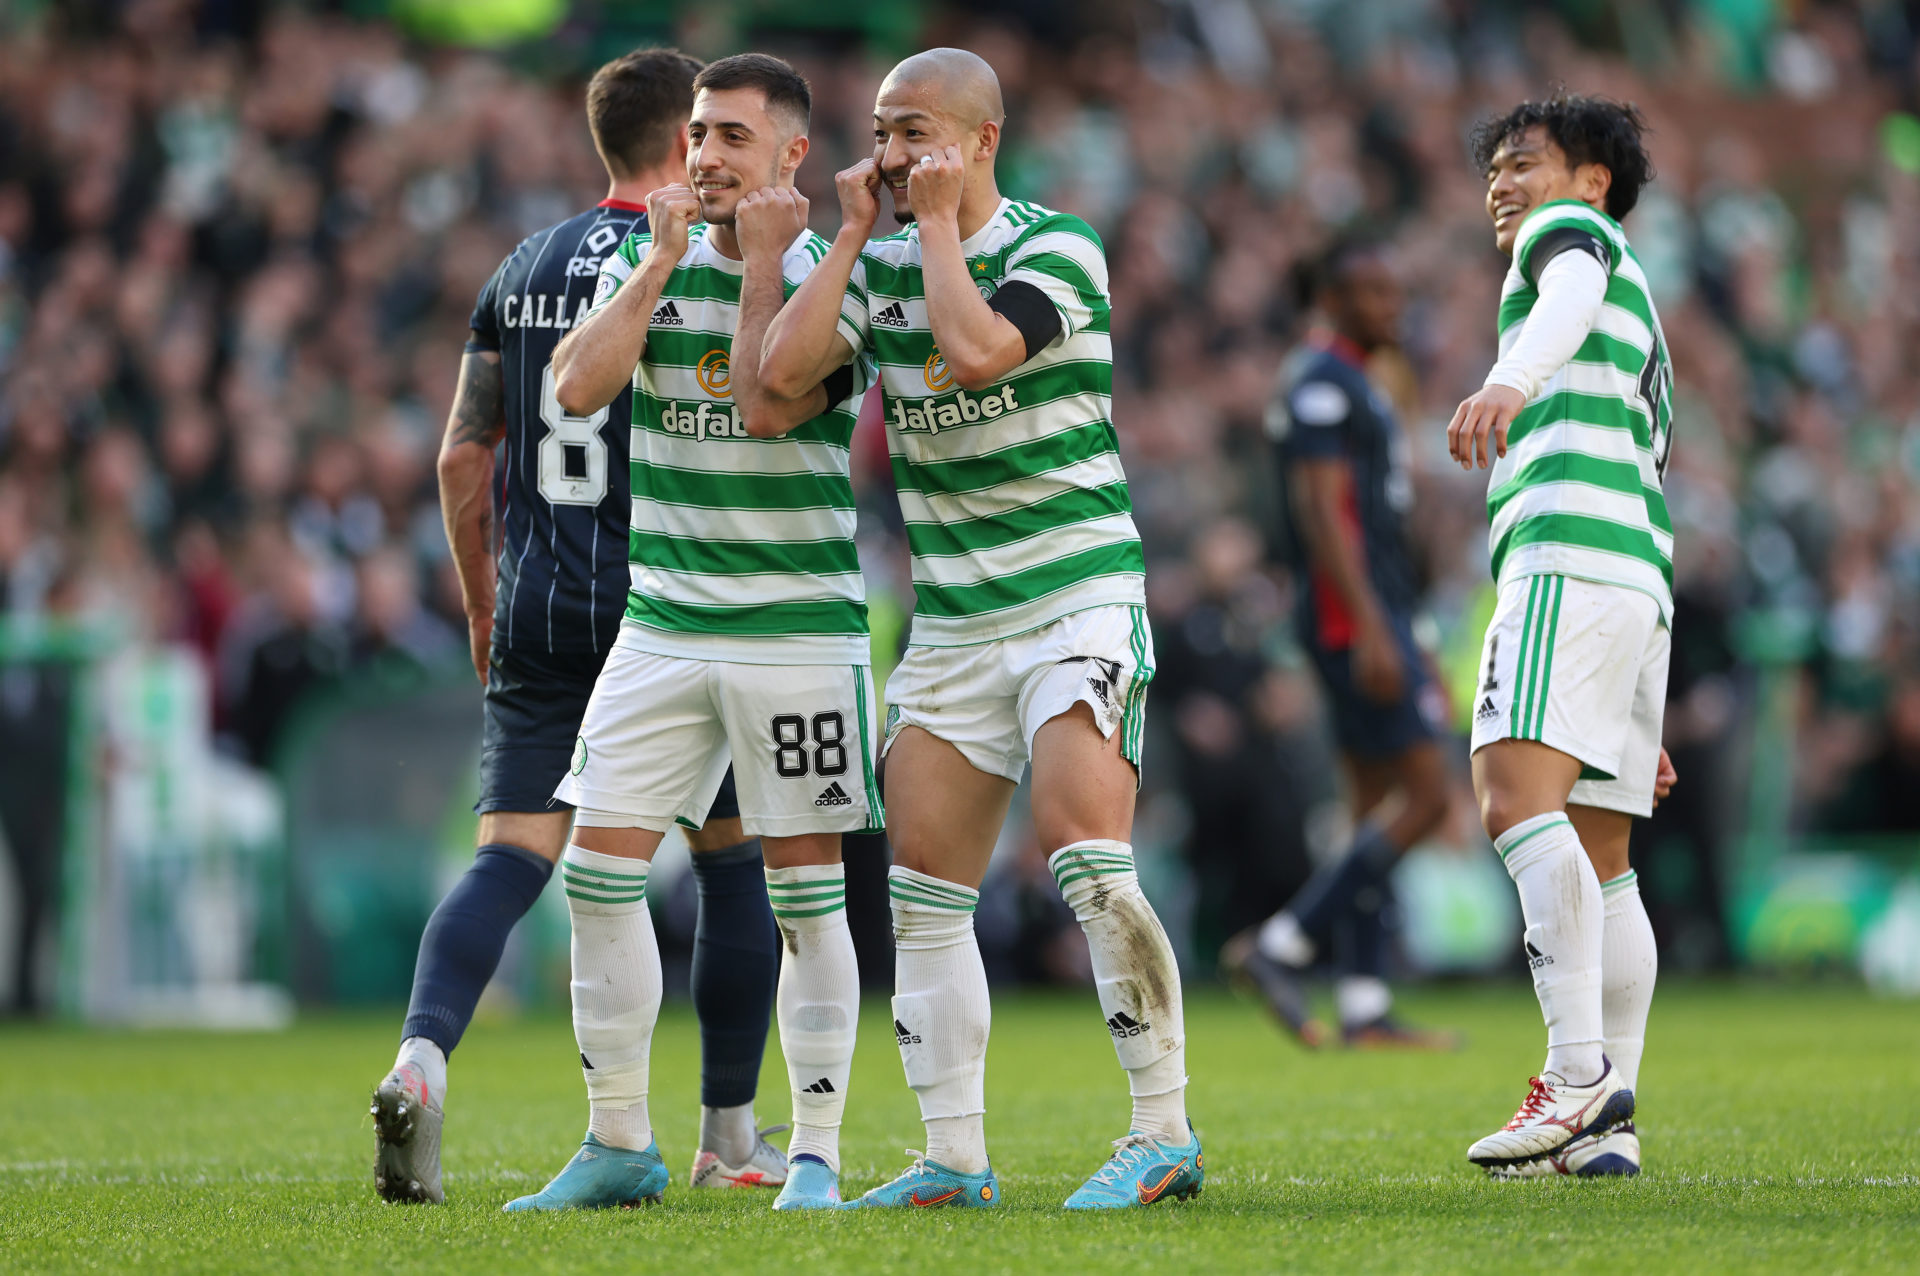 Celtic saw off Ross County at the weekend